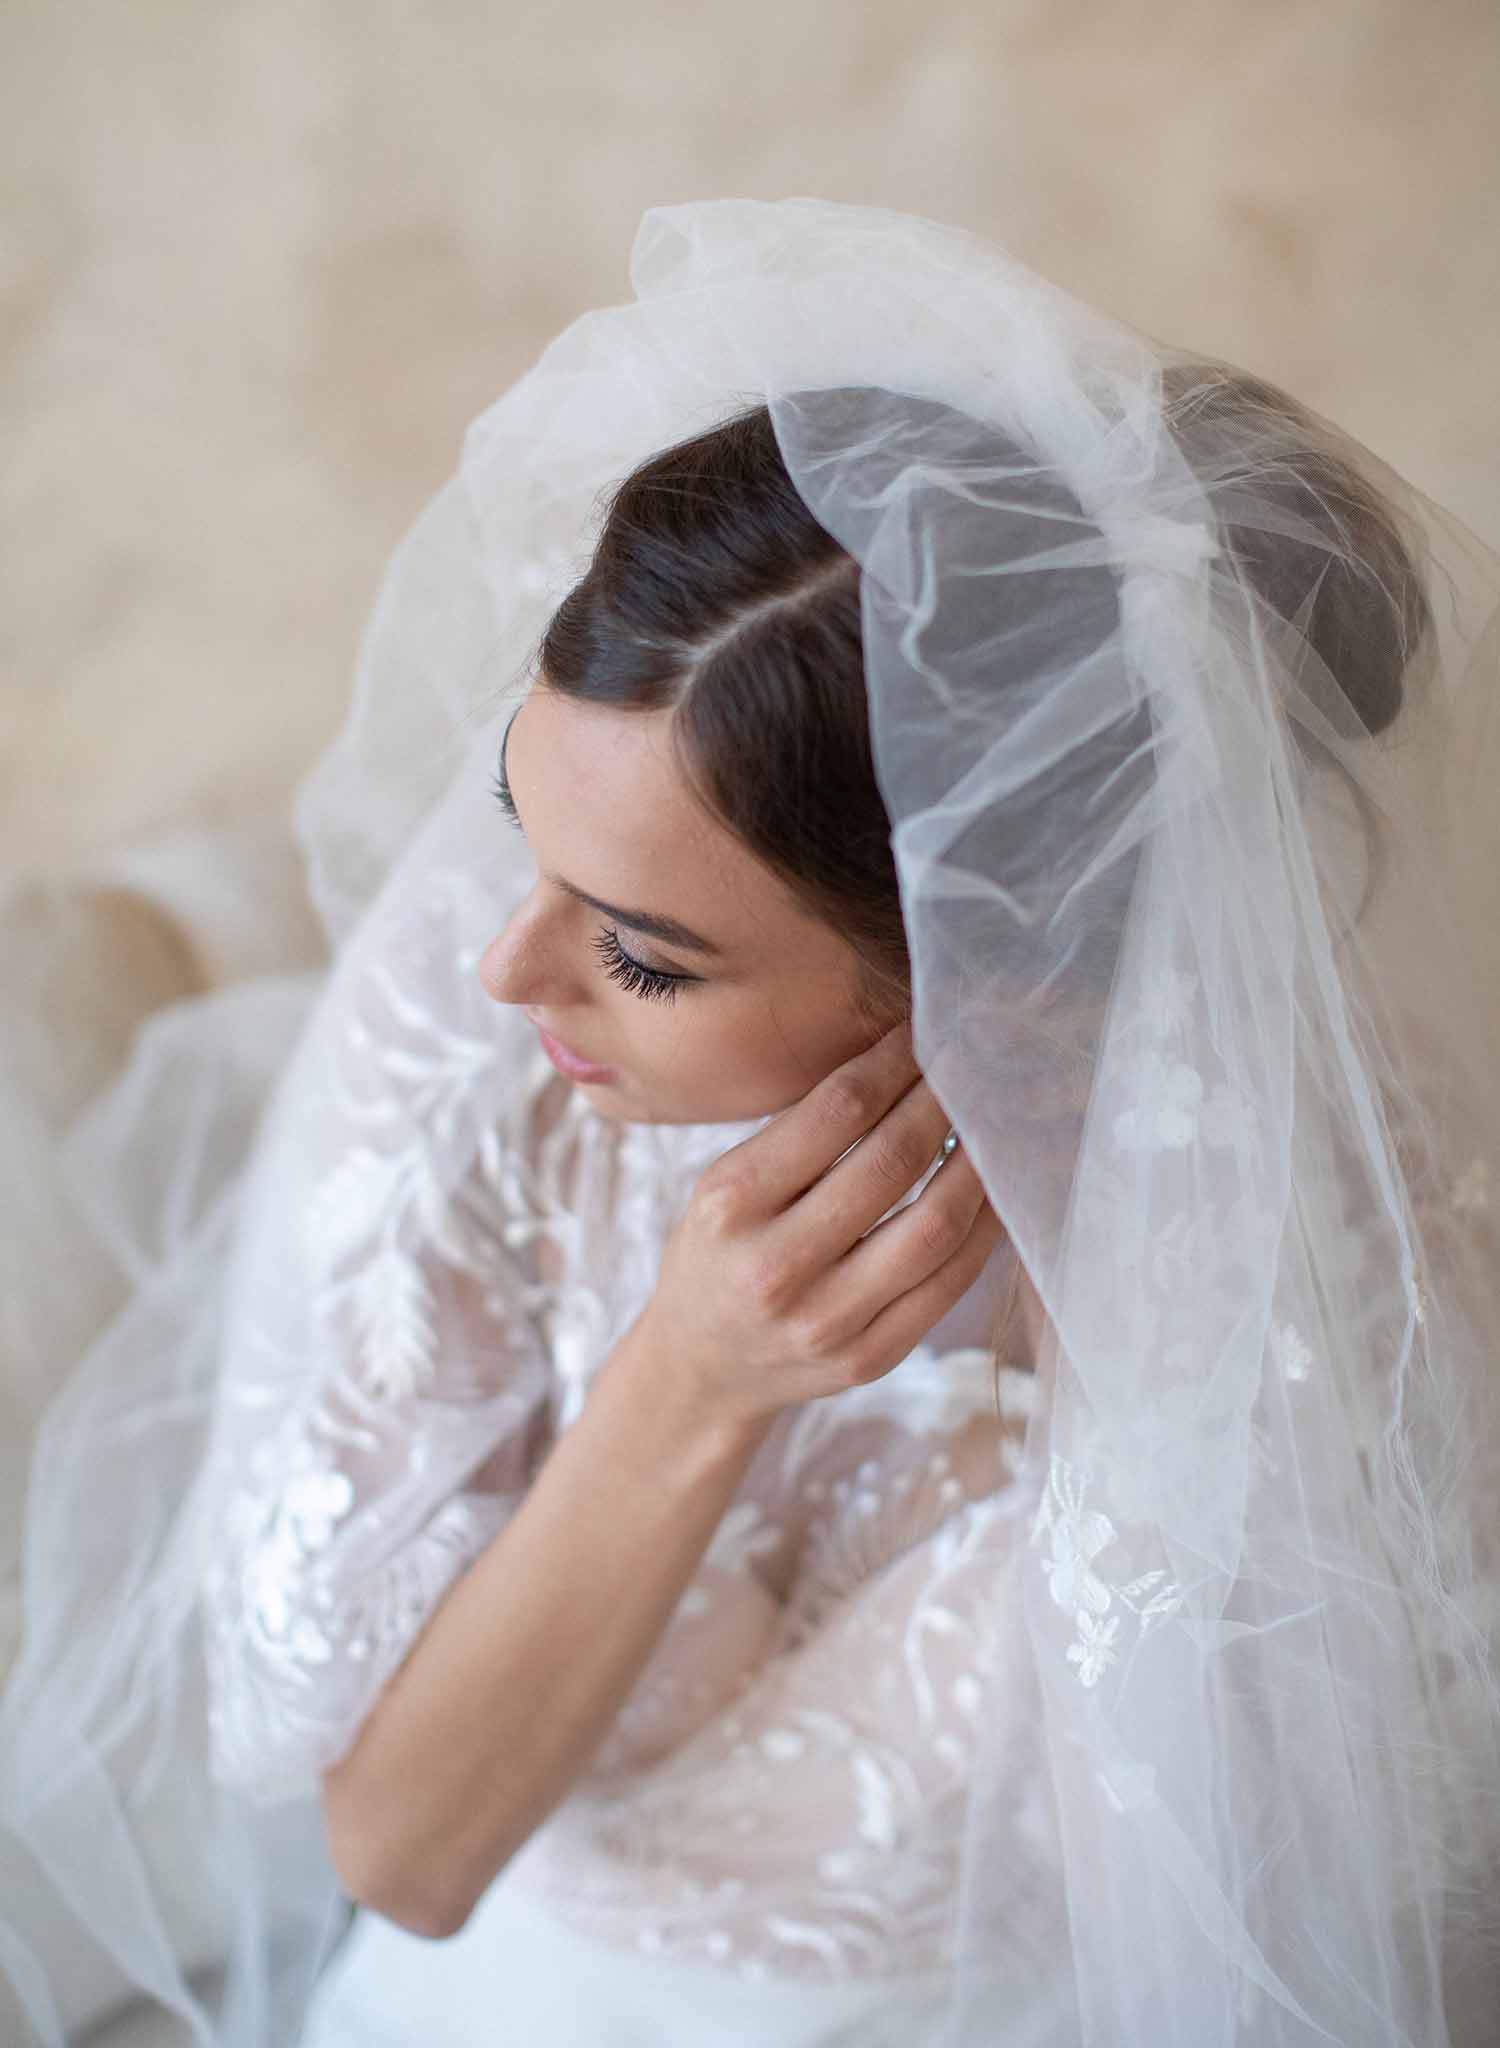 Twigs & Honey Short Bridal Tulle Veil with Beads and A Blusher - Sequin and Bead Embroidered Short Veil with Blusher - Style #2362